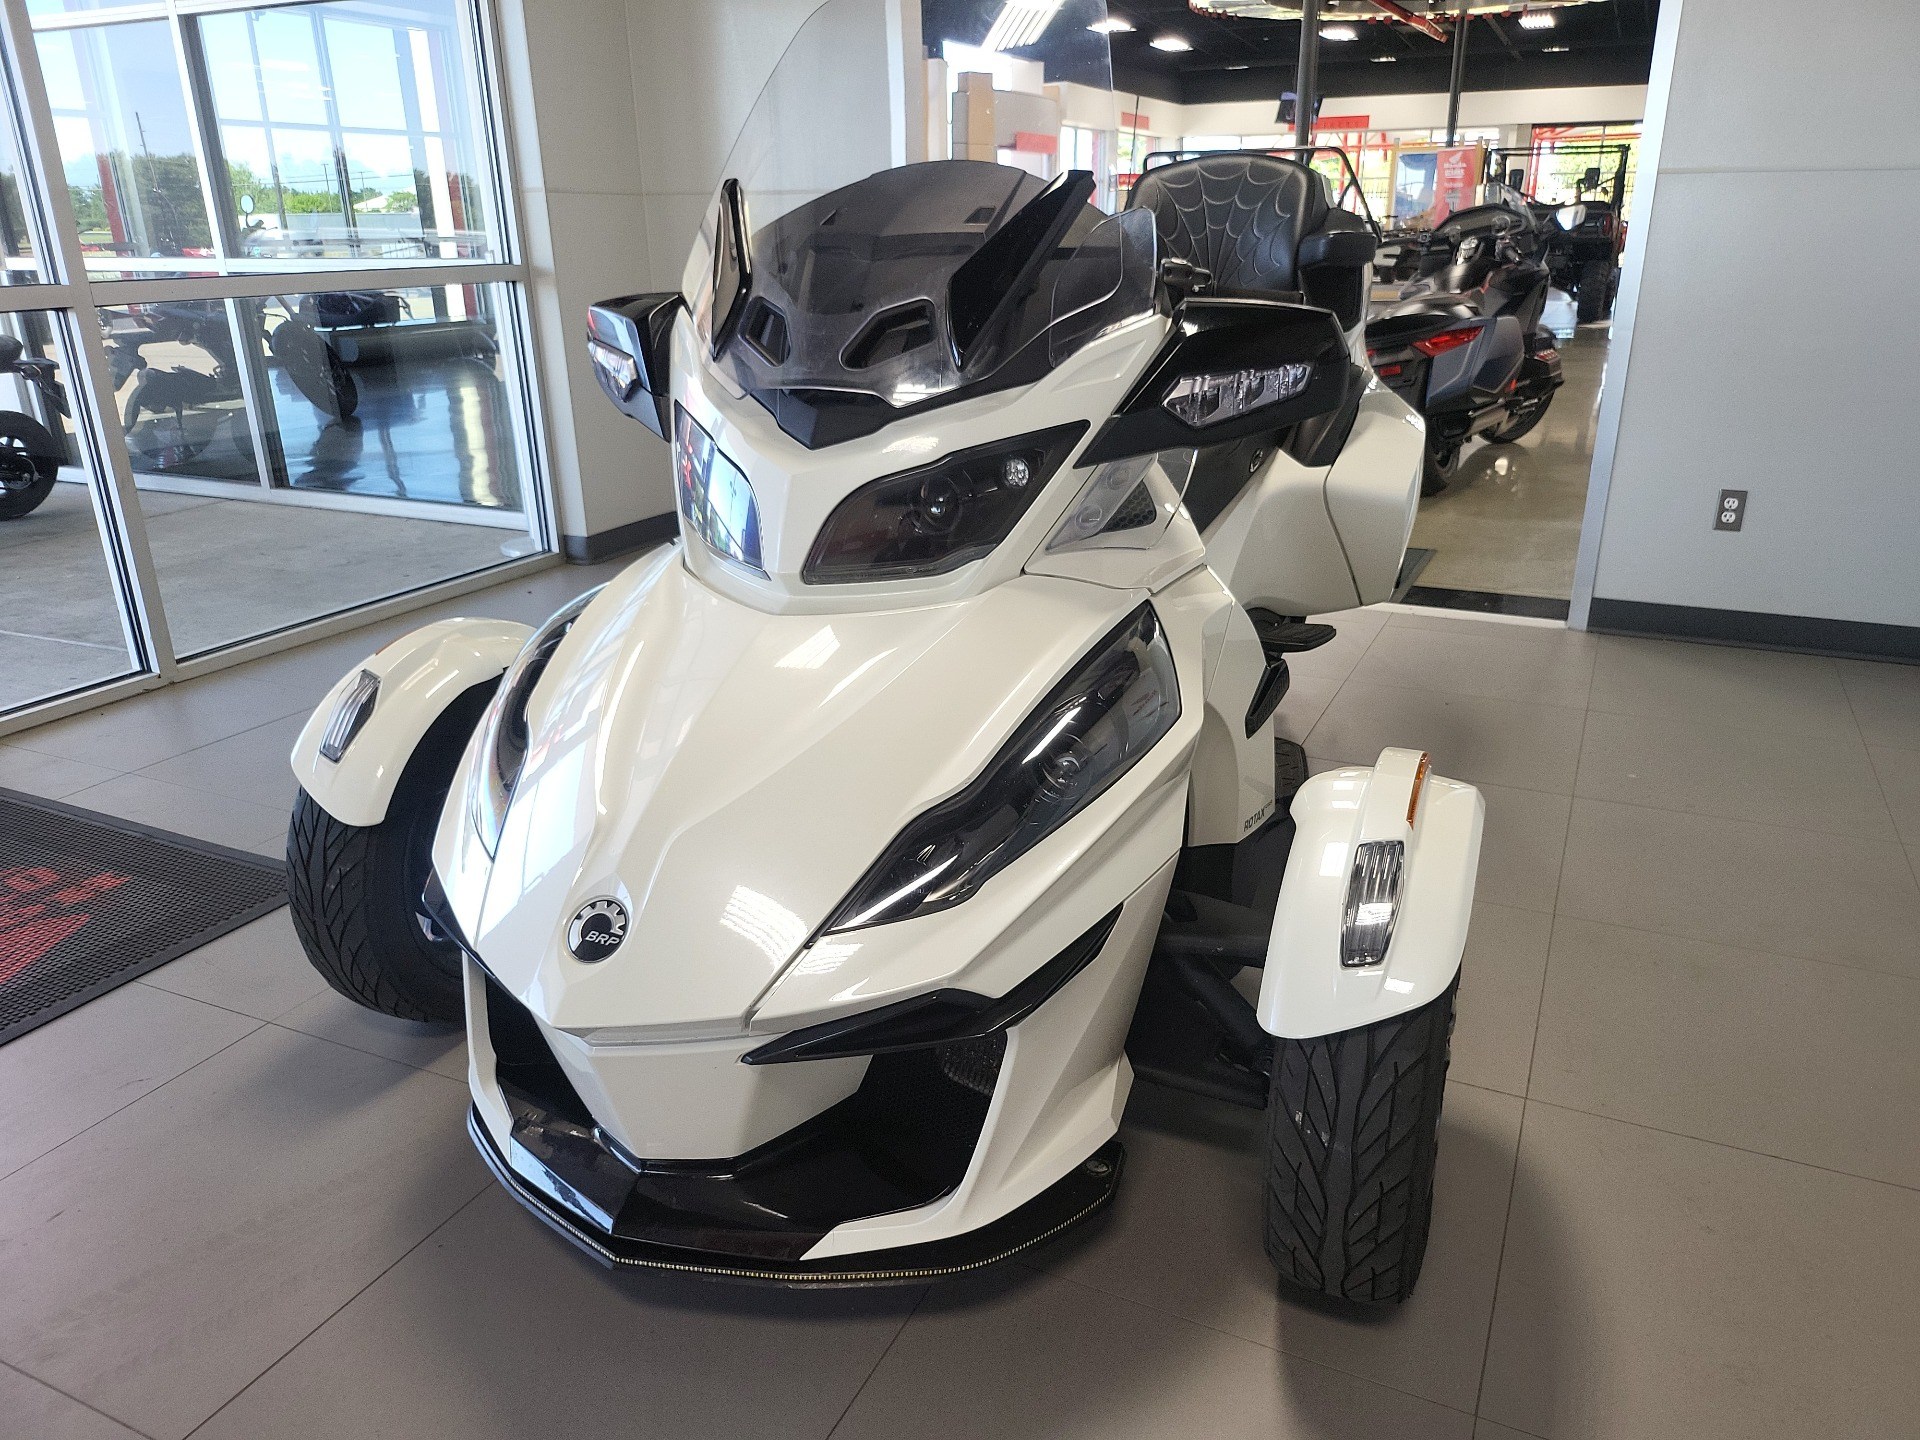 2019 Can-Am Spyder RT Limited in Springfield, Missouri - Photo 12